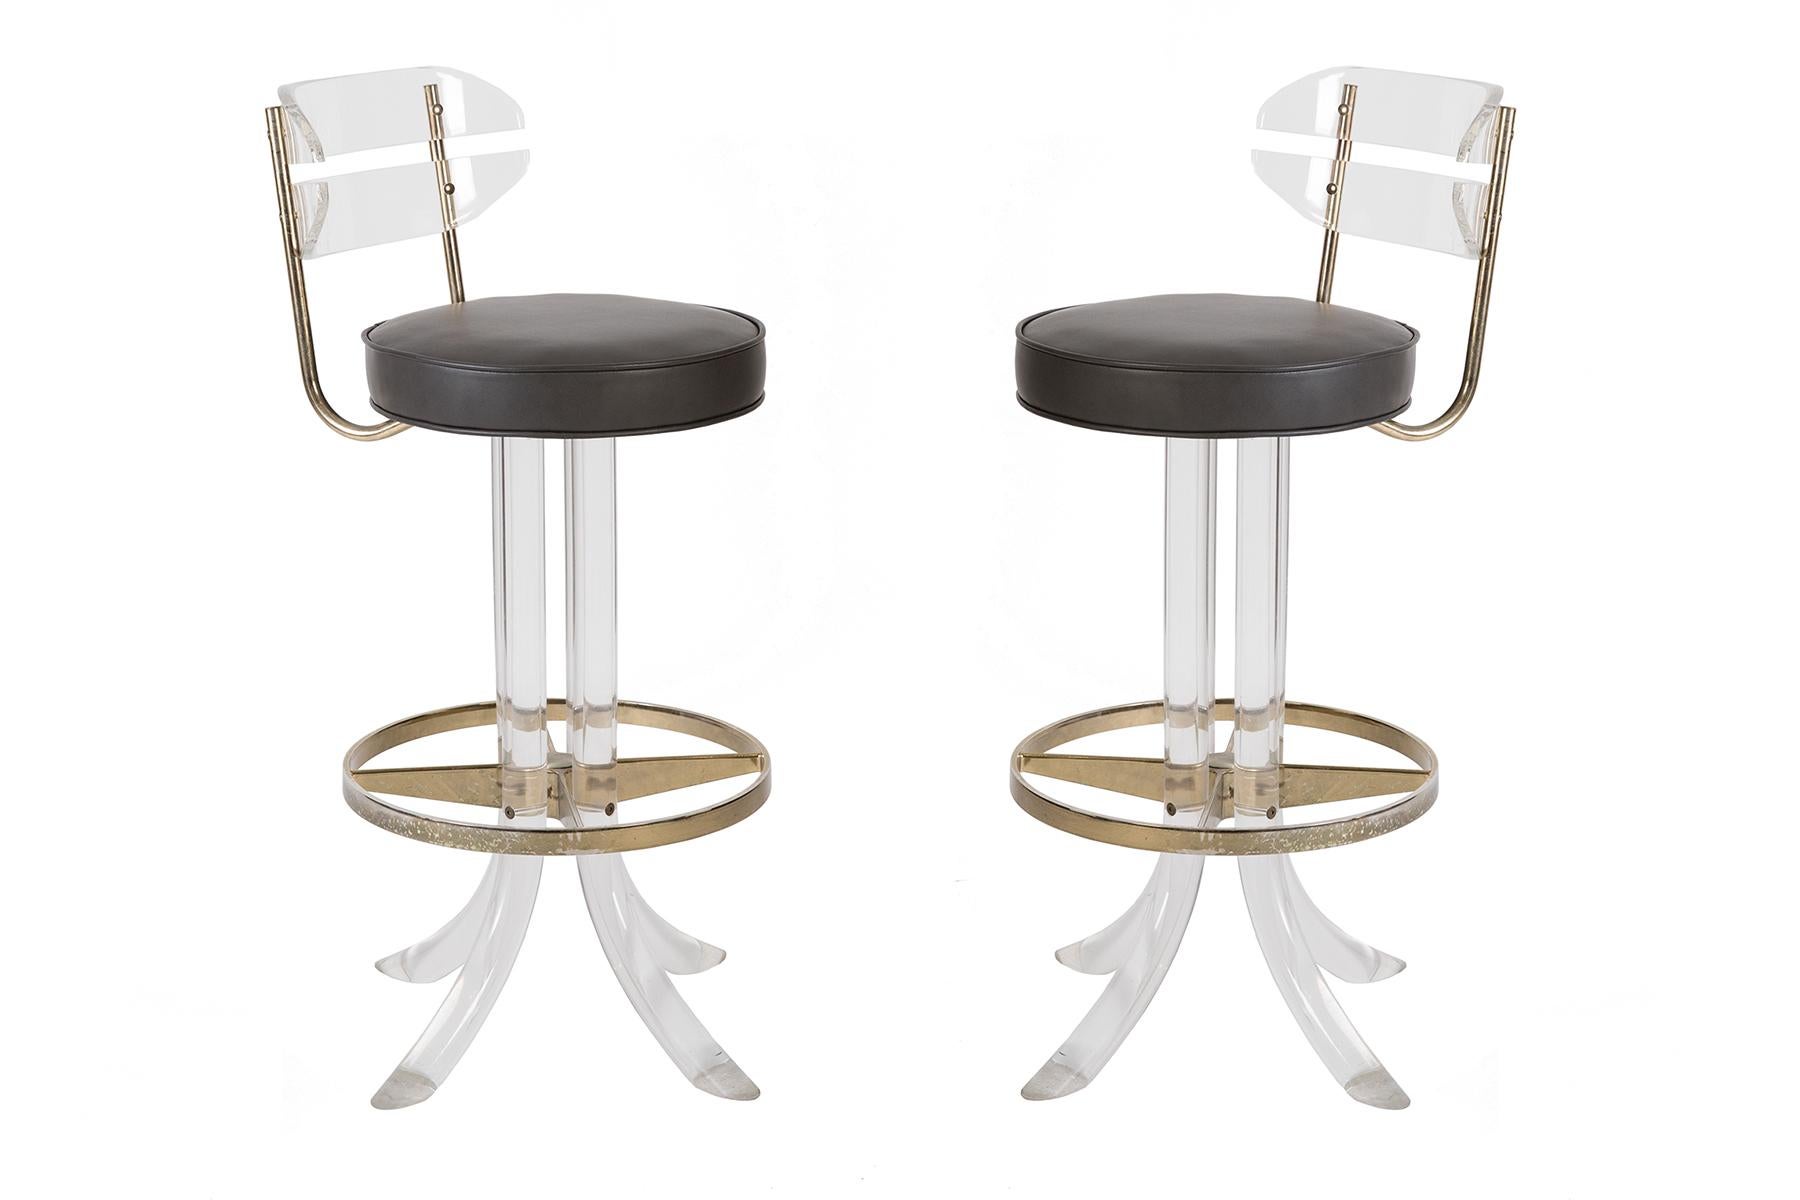 3 barstools with a fantastic mix of materials--conveying a modern lightness with clear Lucite on the legs and backs, flanked by futuristic touches of brass and a supple dark grey leather seat. Each stool has newly upholstered seats and swivels so